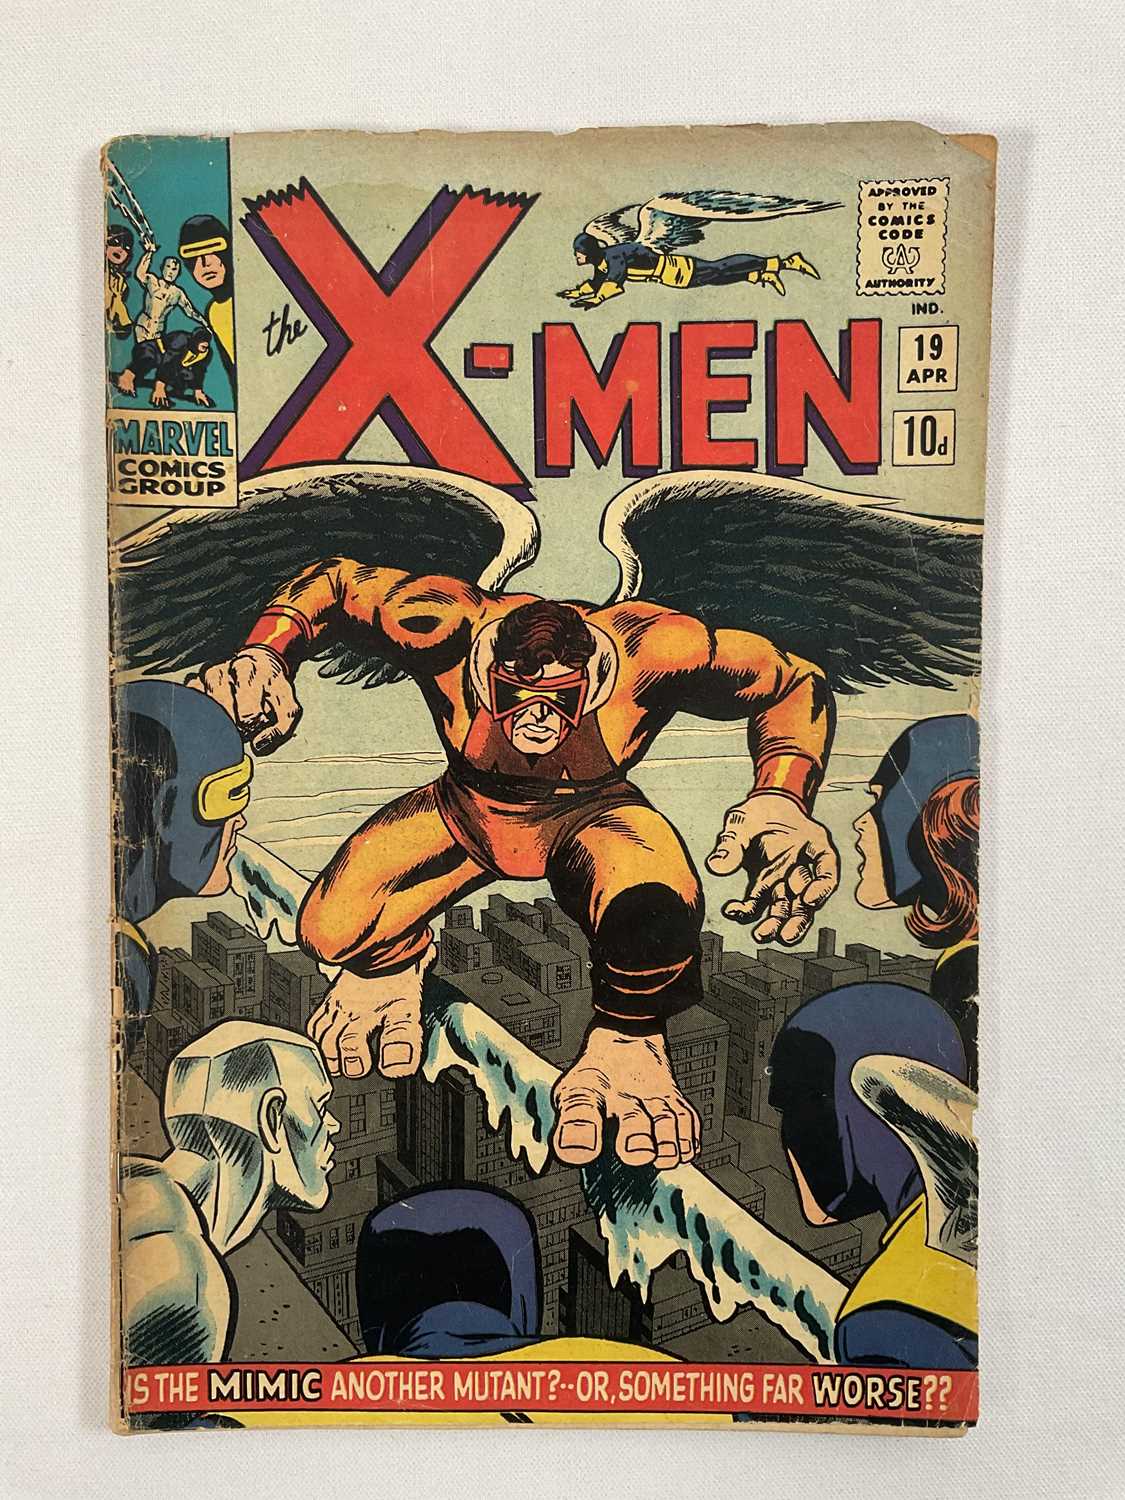 X-MEN #17, 18, 19, 20 (4 in Lot) - (1966 - MARVEL - UK Price Variant) - Includes the first - Image 3 of 6